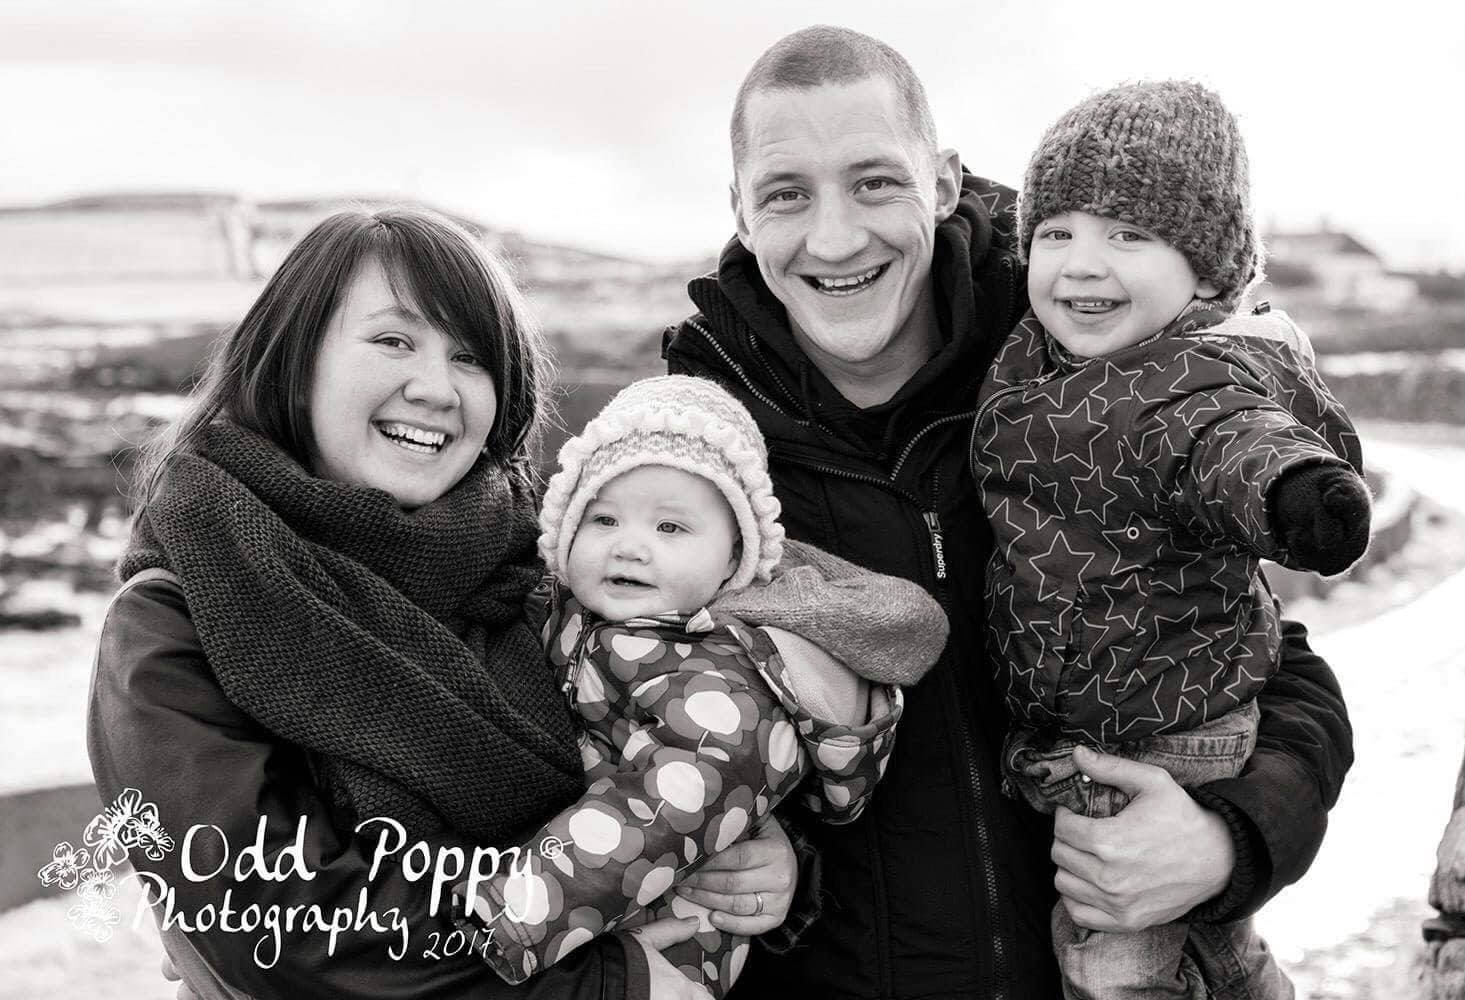 A family photo taken the day before PJ's cardiac arrest. From left to right: Siobhan Pirie, Merran, Steven, PJ.